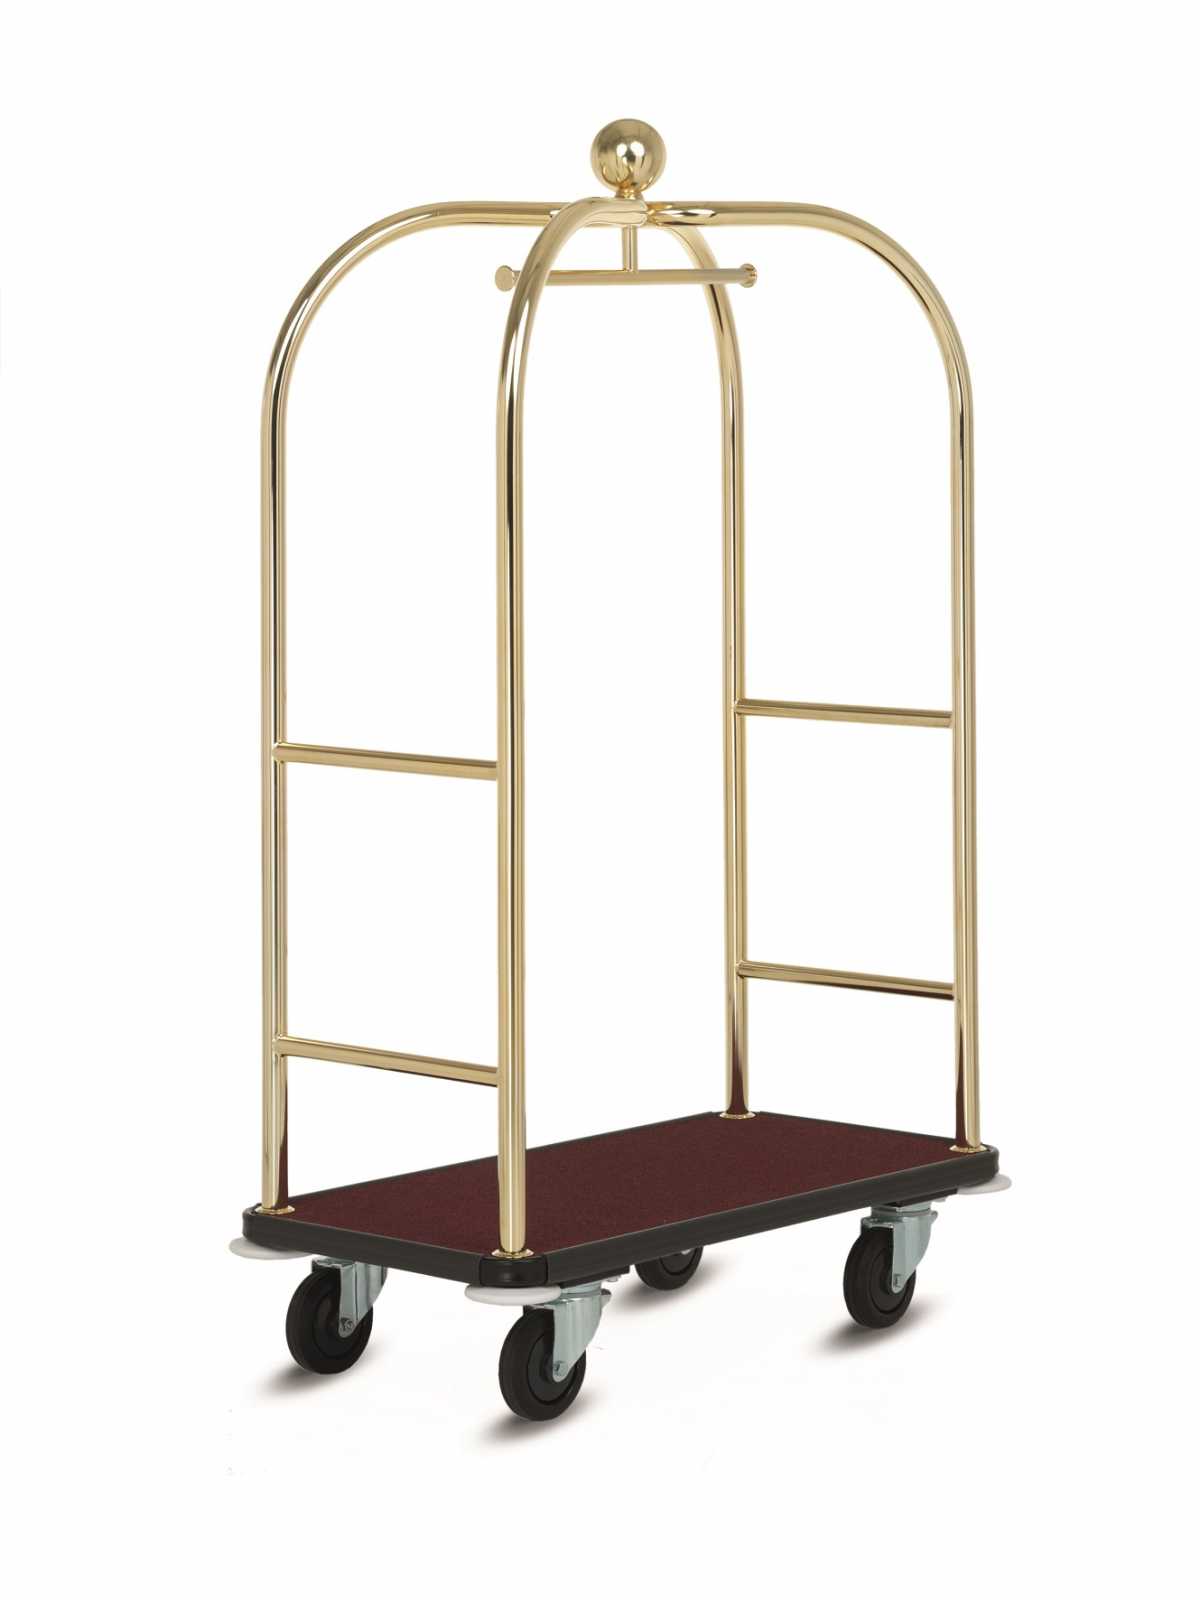 WANZL Luggage Collection Trolley GS-Lobby, Gold-plated stainless steel